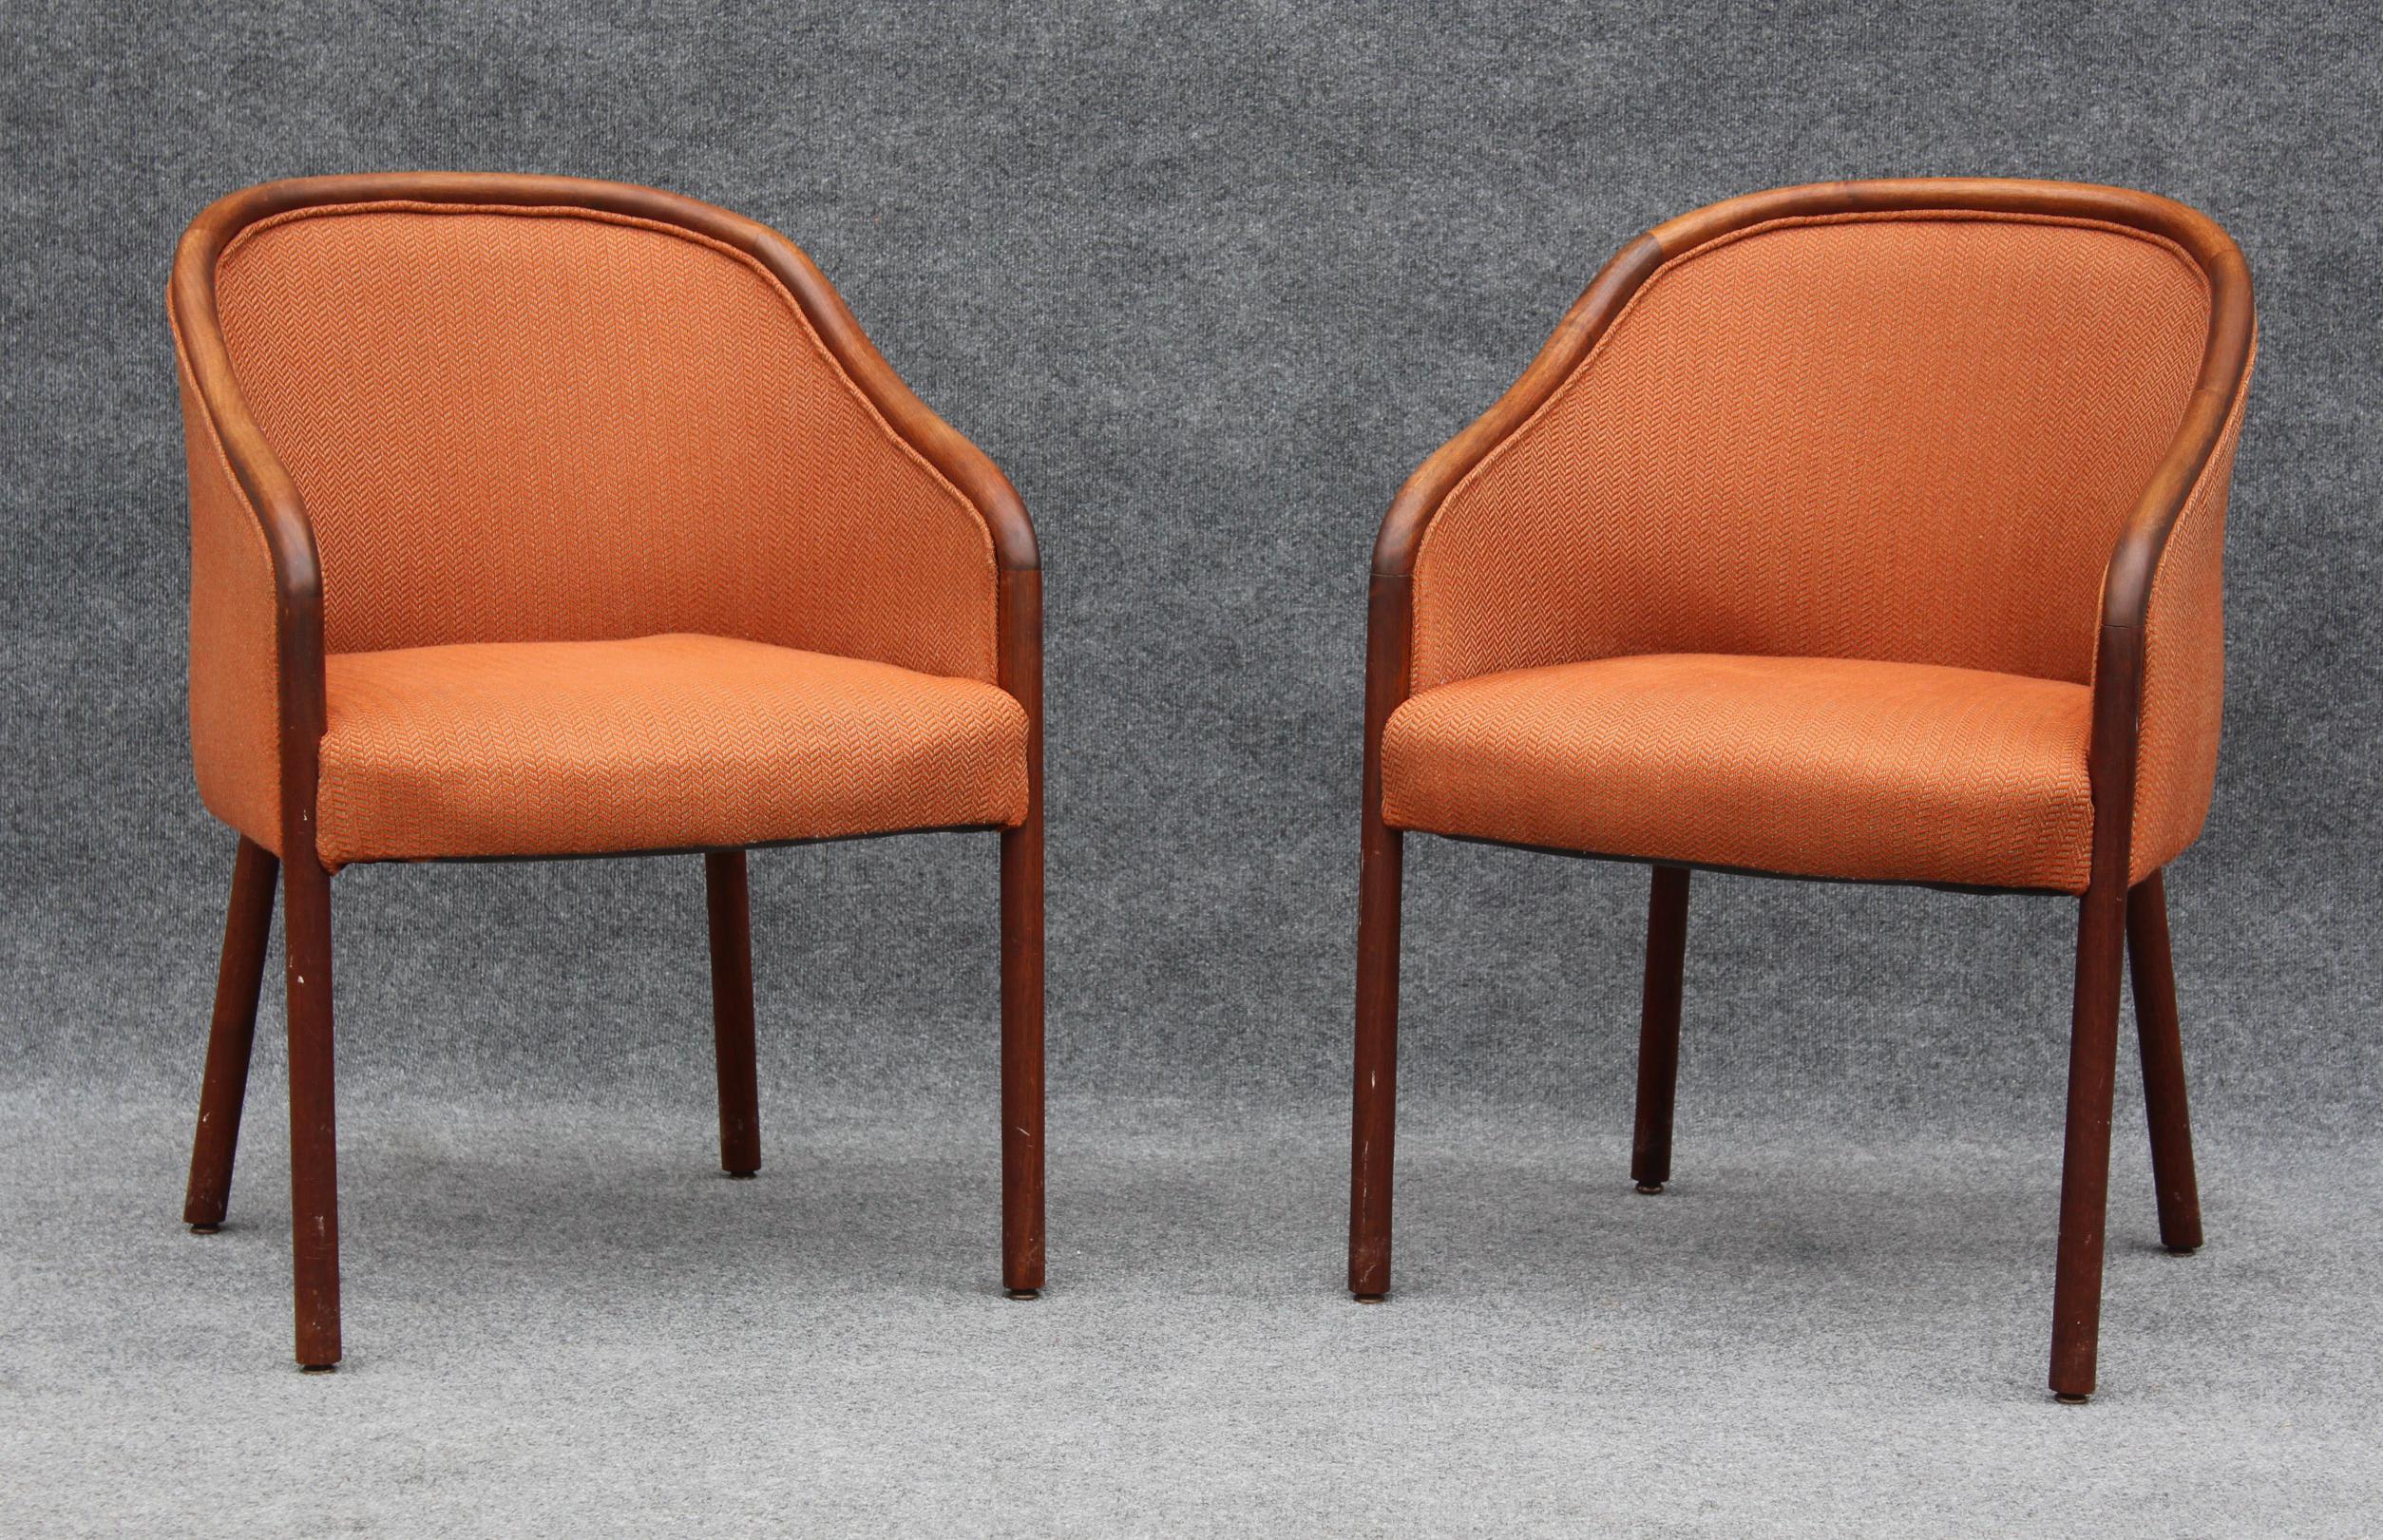 This pair of armchairs or side chairs was made after the iconic Ward Bennett design in the 1970s. Featuring clean lines and solid walnut frame construction, their upholstry is in great shape. Pictured with our Ward Bennett style I-beam side tables,